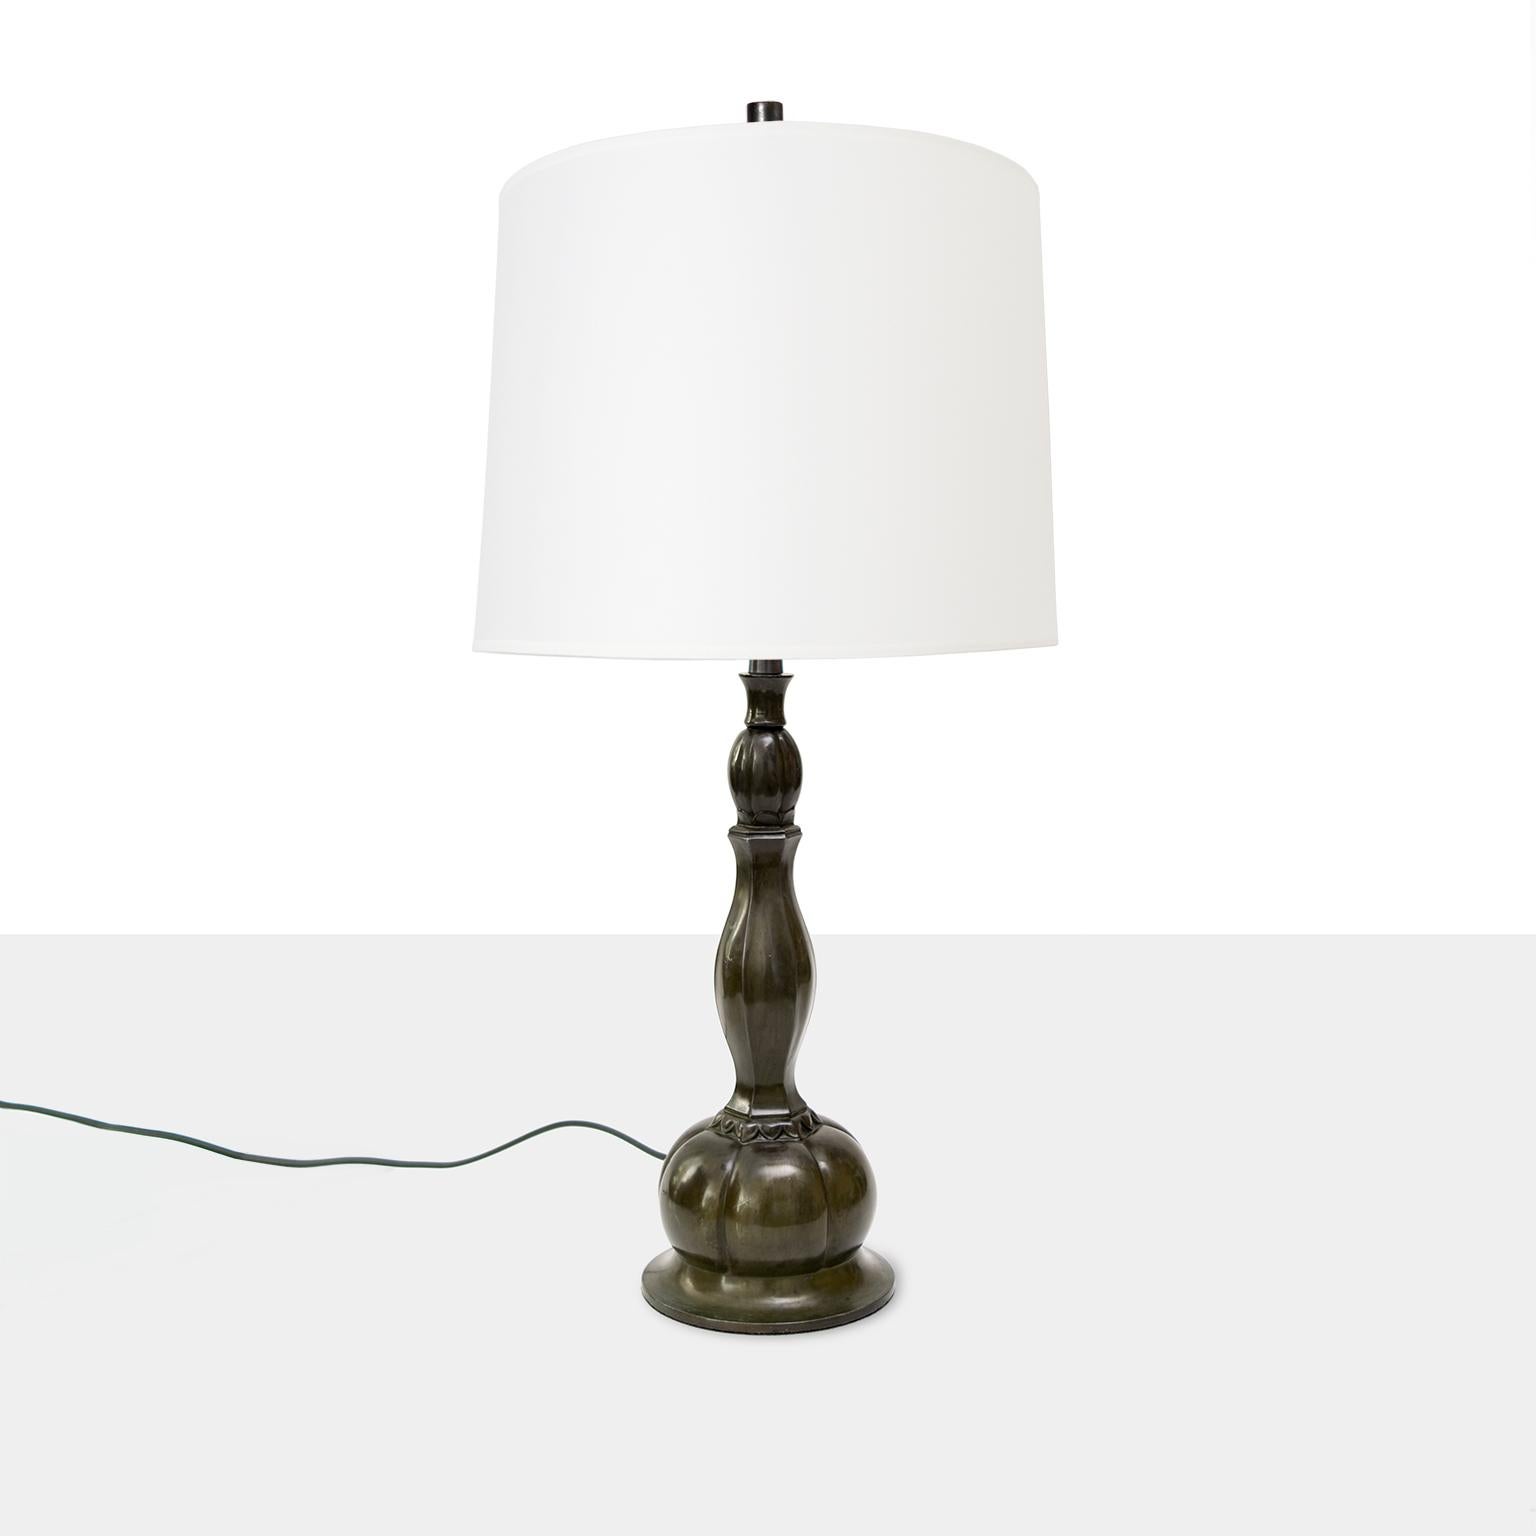 Scandinavian Modern table lamp designed by Just Andersen. This lamp is made from a unique metal alloy developed by Andersen which he named after the Disko Bay in Iceland. Lamp has rewired with a new three-way socket and silk cord, ready for use in